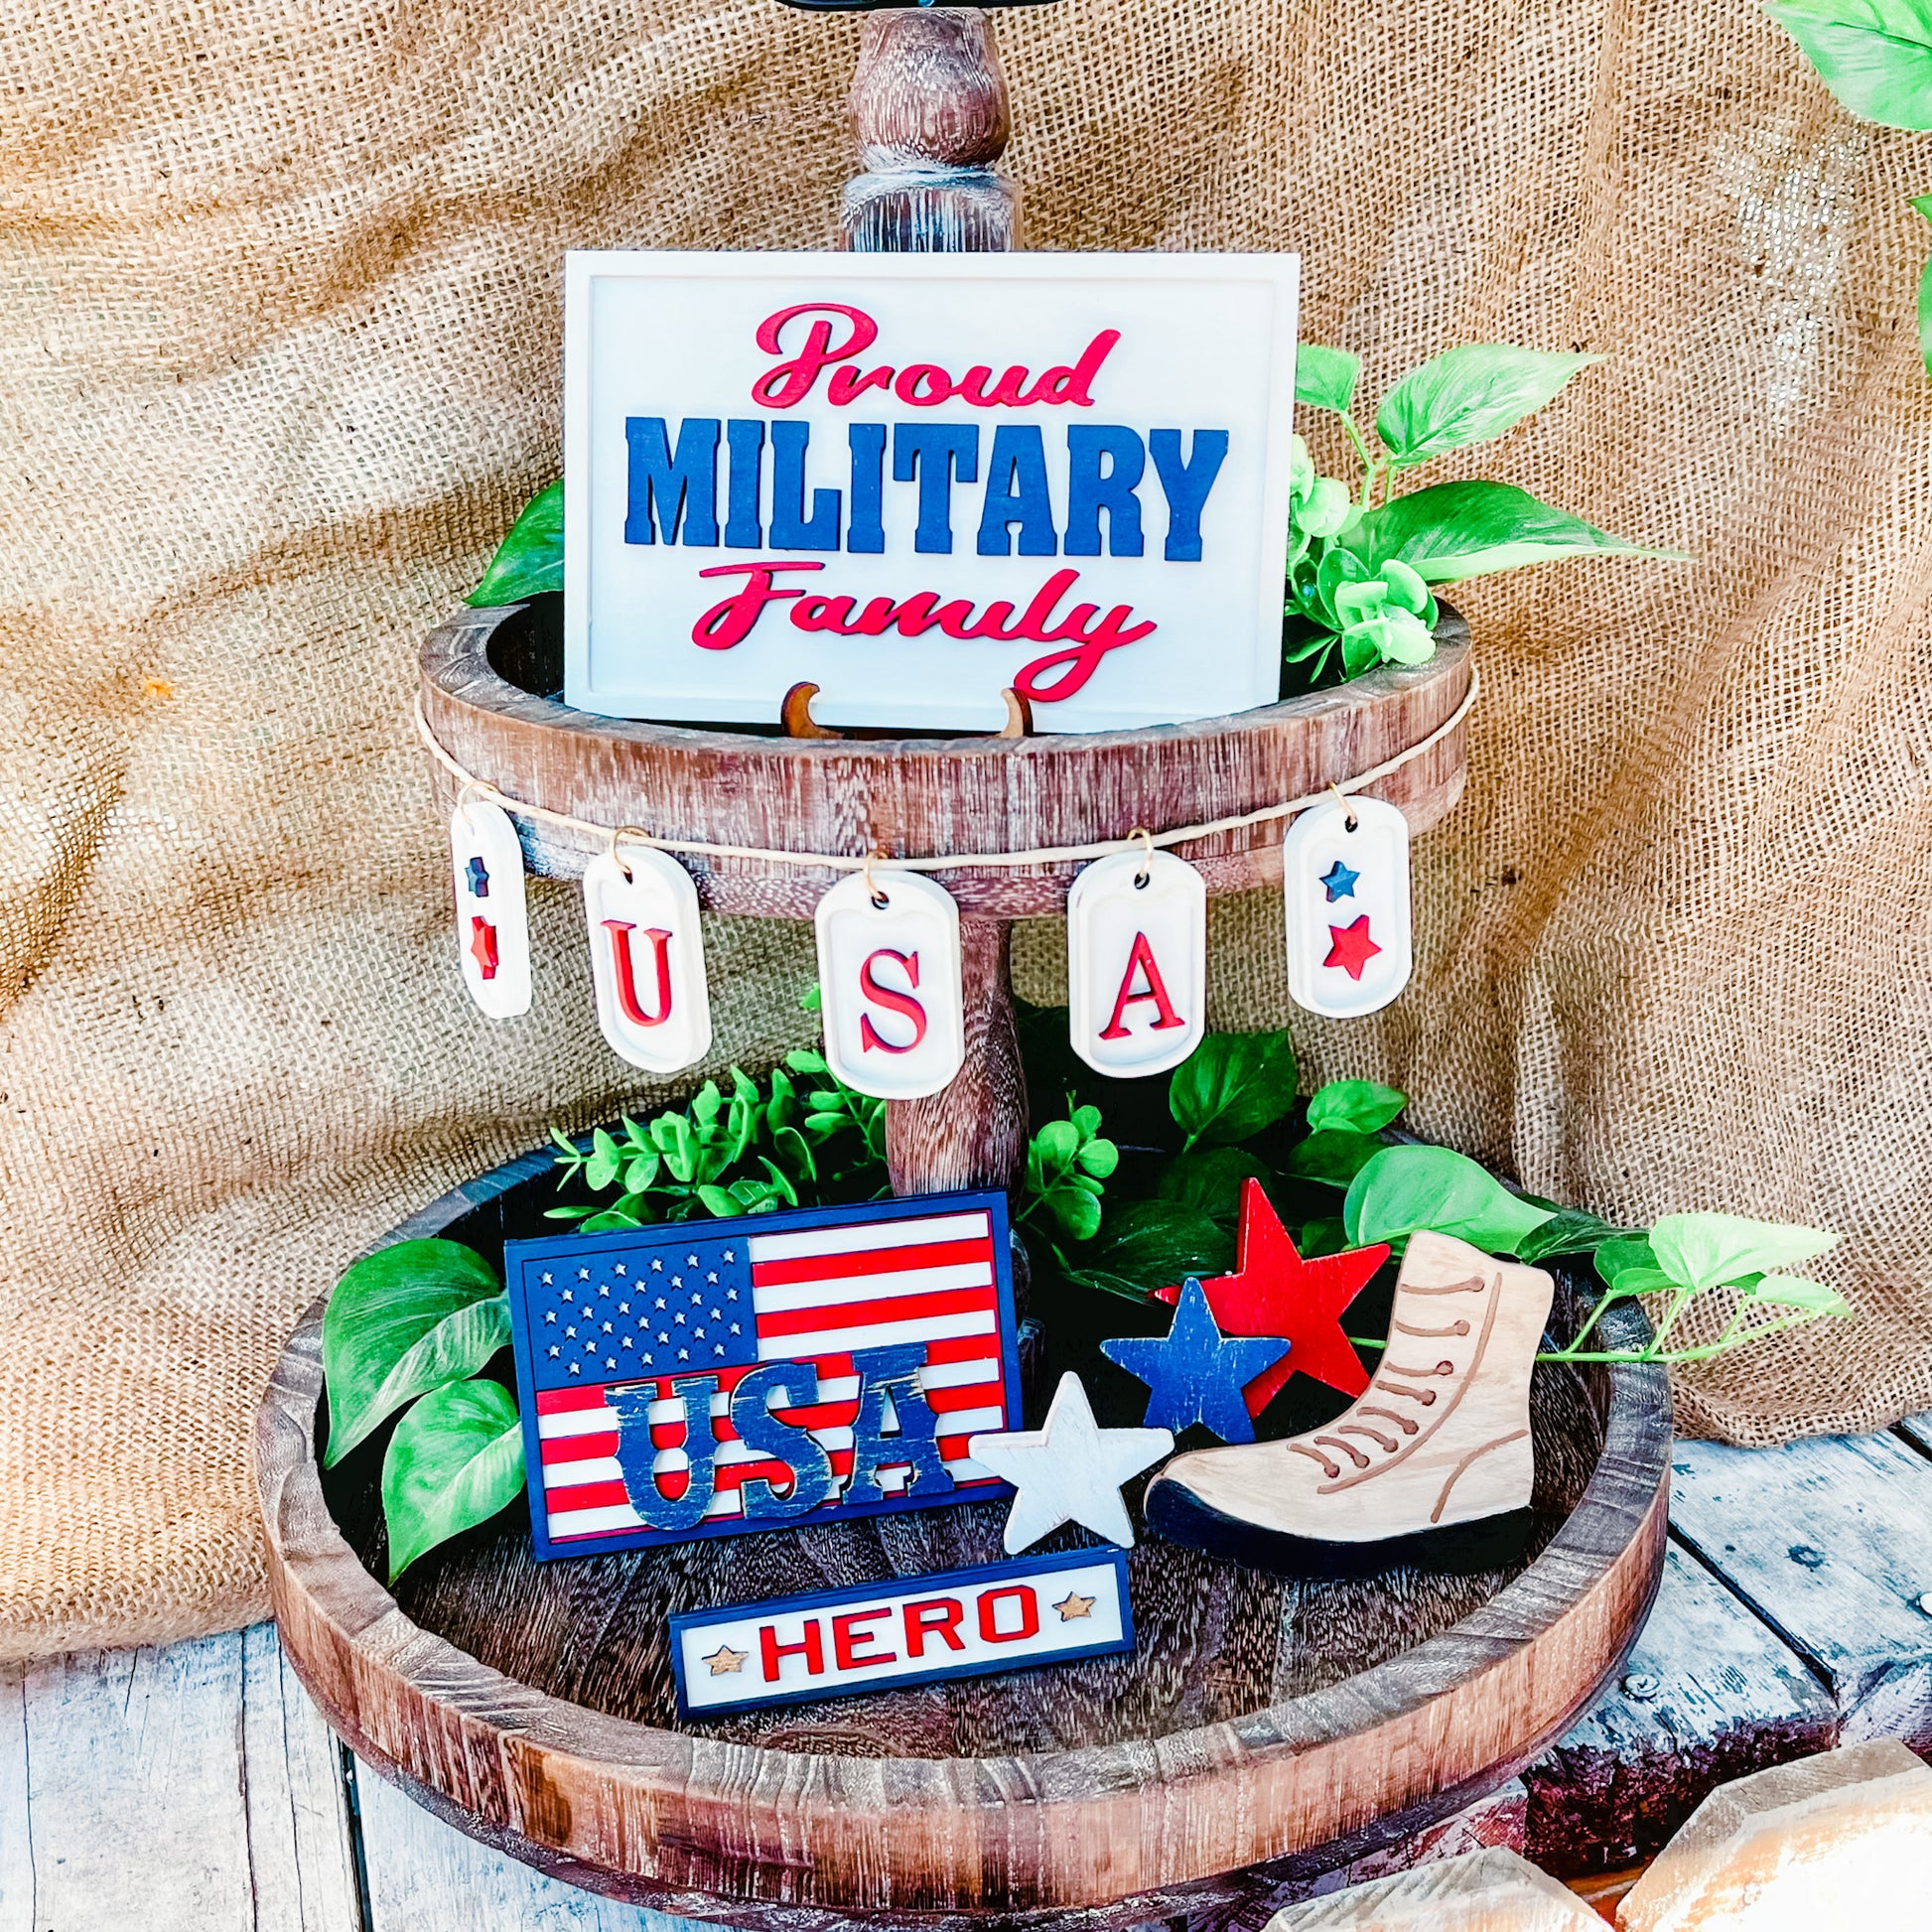 Proud Military Family: Tiered Tray Collections - Paisley Grace Makery